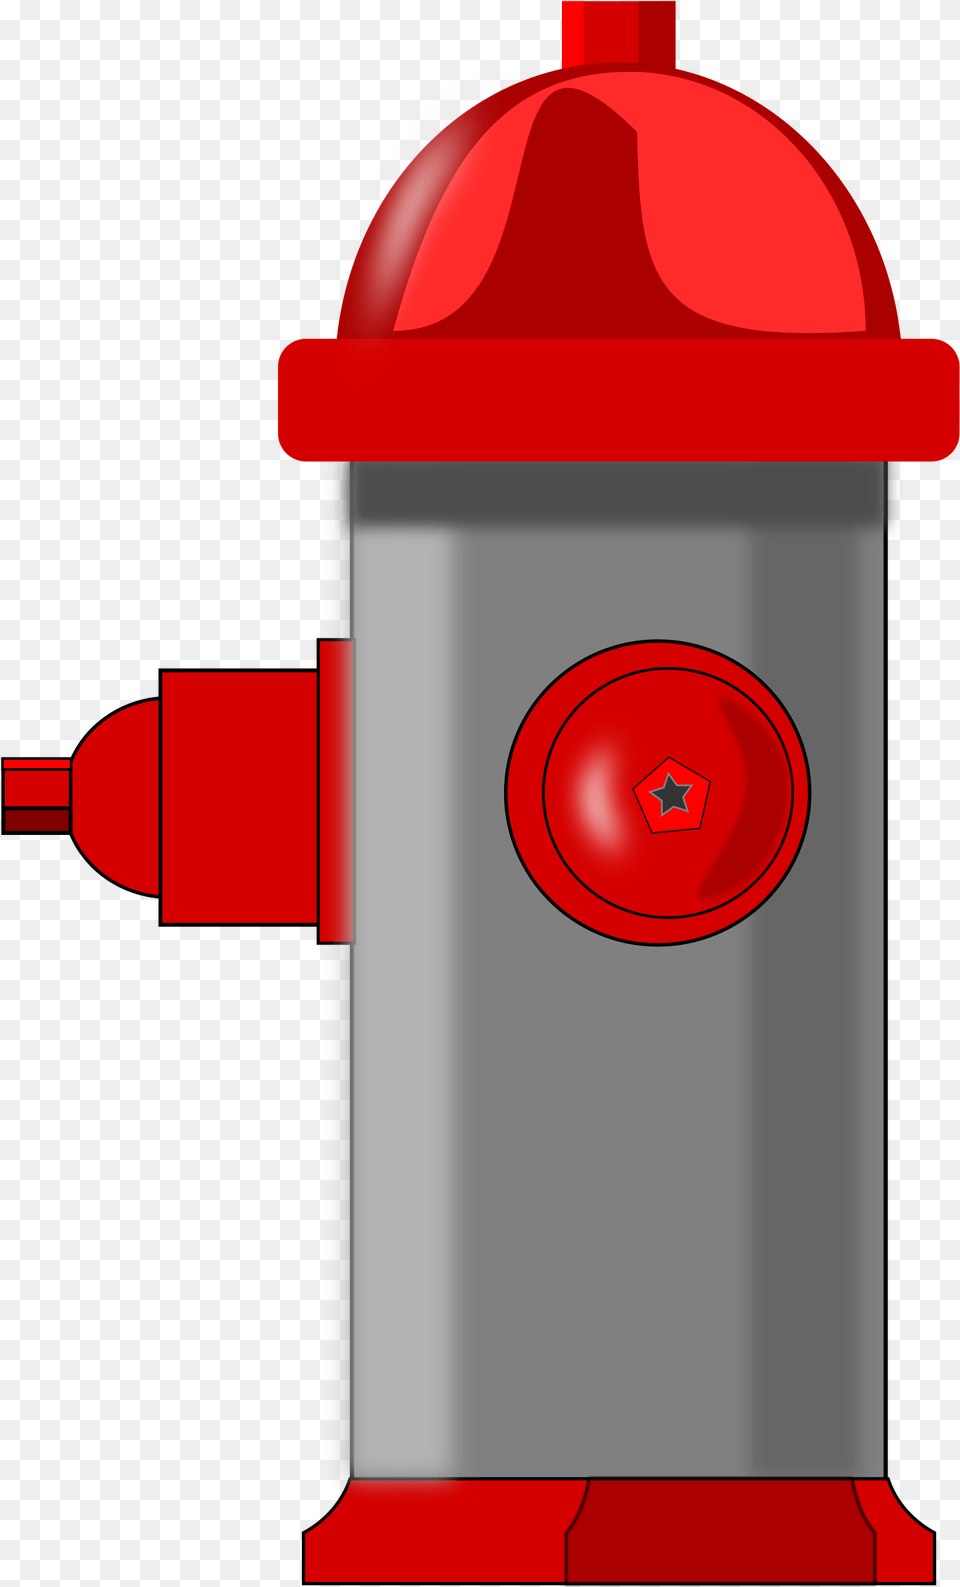 Fire Hydrant Image Hydrant Fire Hydrant Clip Art, Fire Hydrant, Mailbox Free Transparent Png